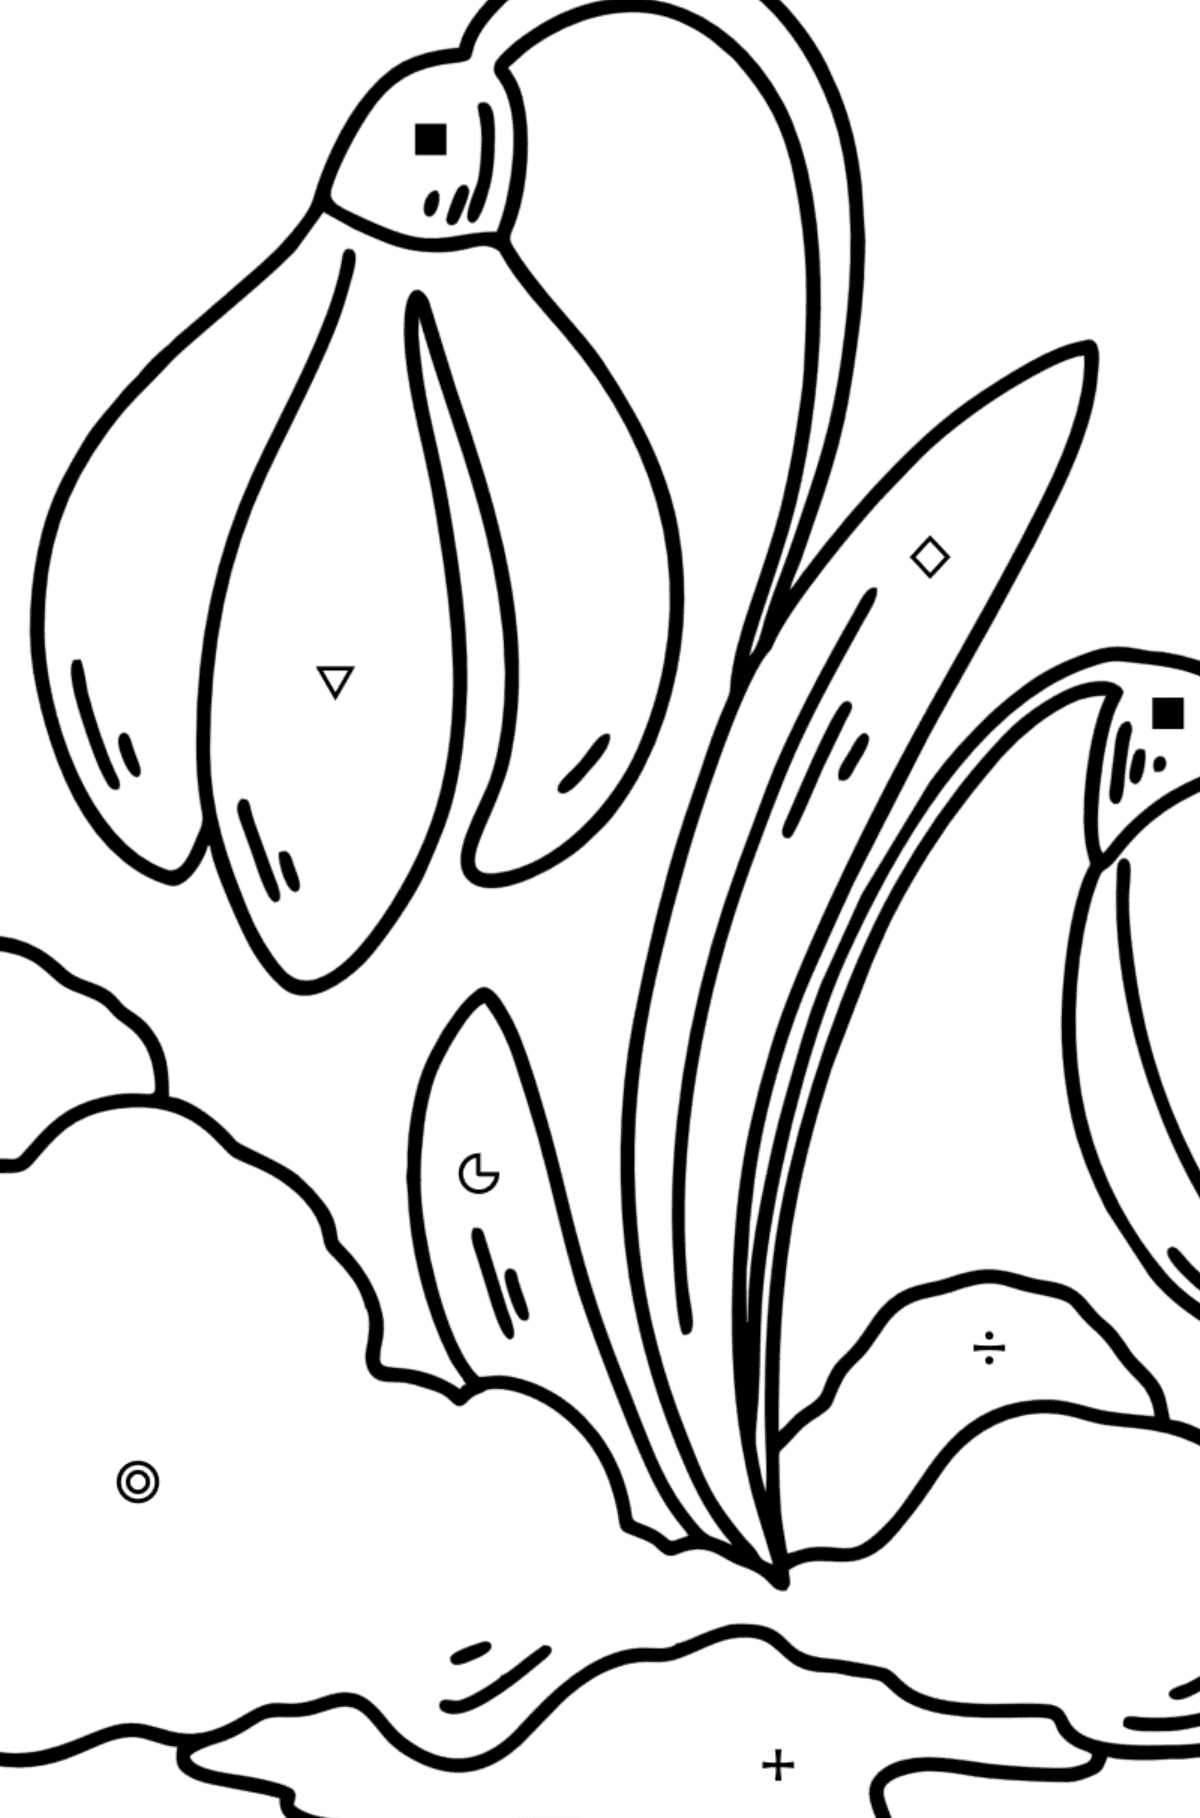 Spring Snowdrops coloring page - Coloring by Symbols and Geometric Shapes for Kids